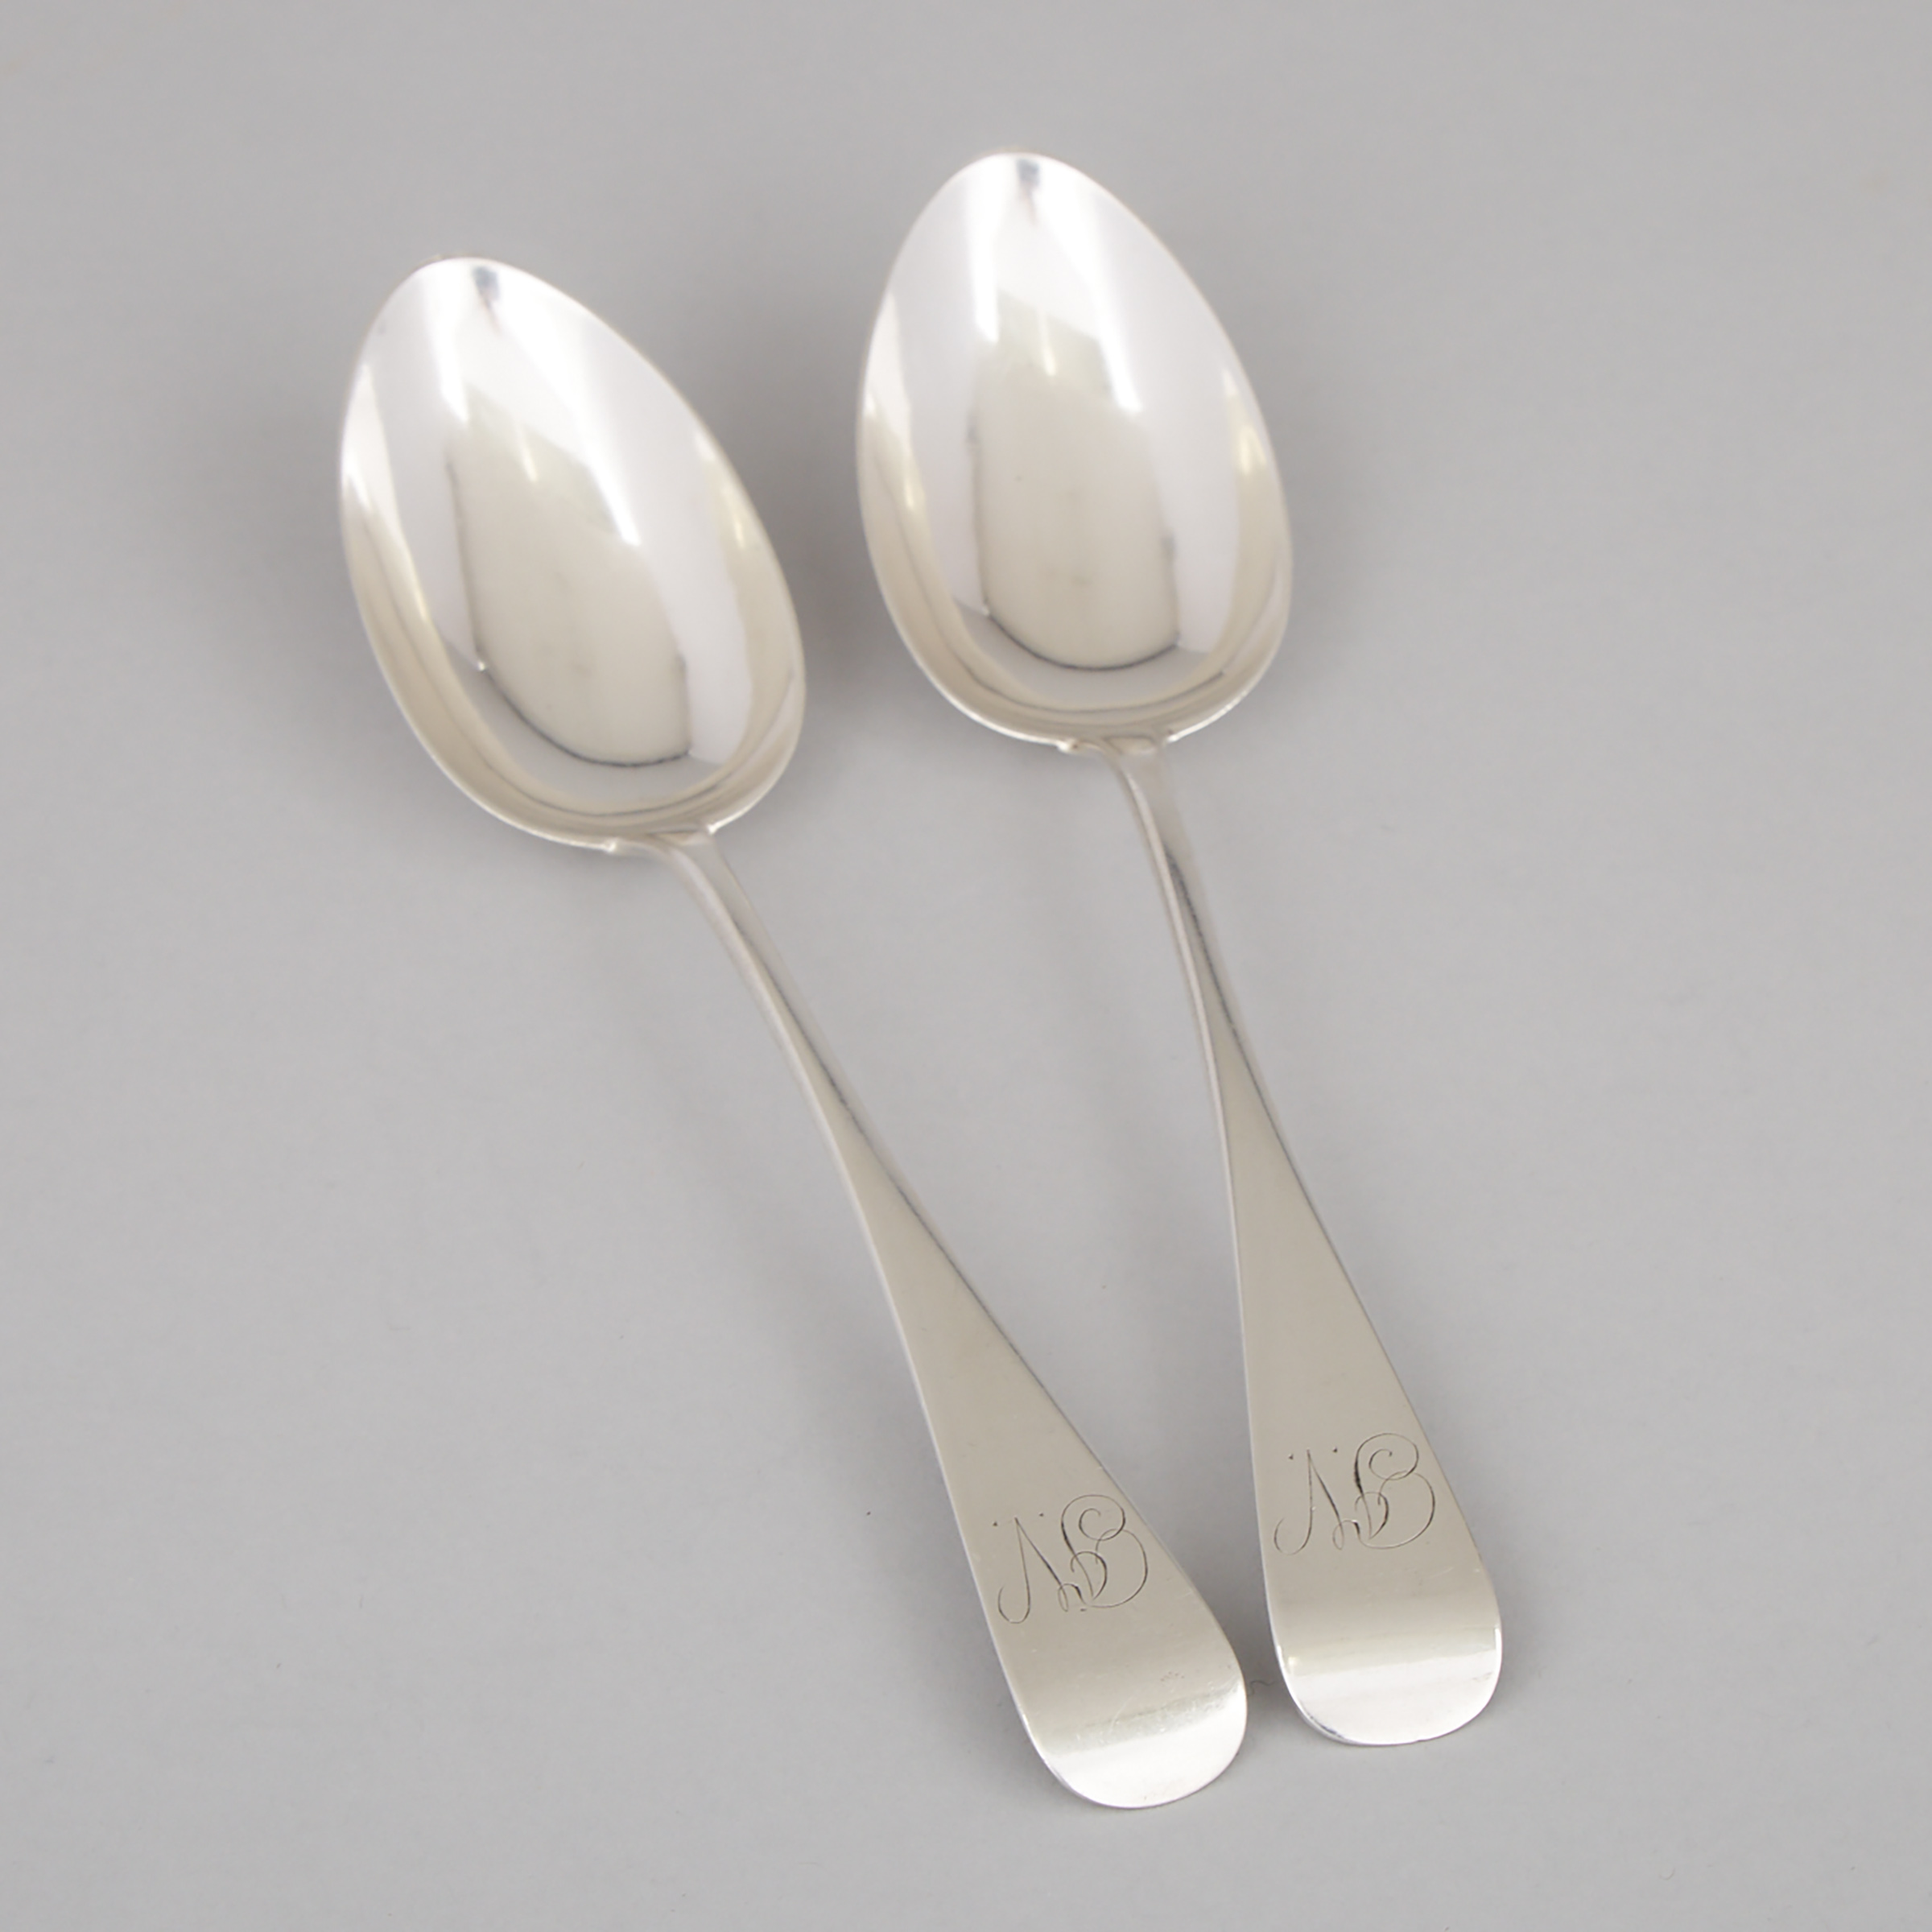 Pair of Canadian Silver Old English Pattern Table Spoons, Robert Hendery, Montreal, Que., c.1860-70